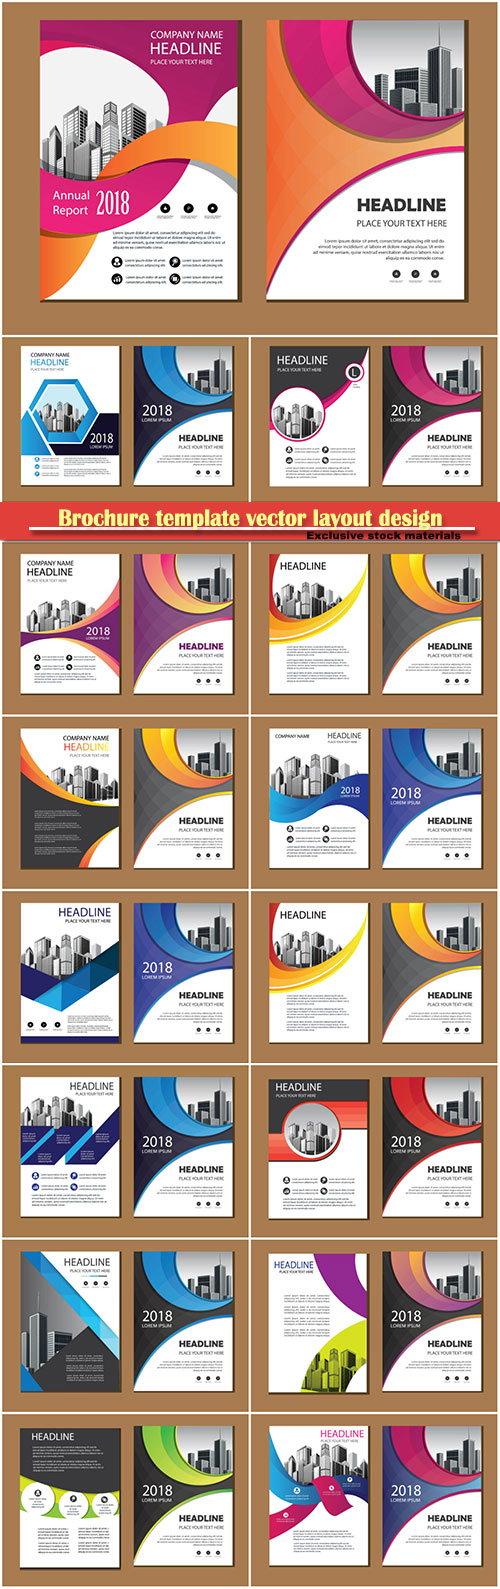 Brochure template vector layout design, corporate business annual report, magazine, flyer mockup # 149